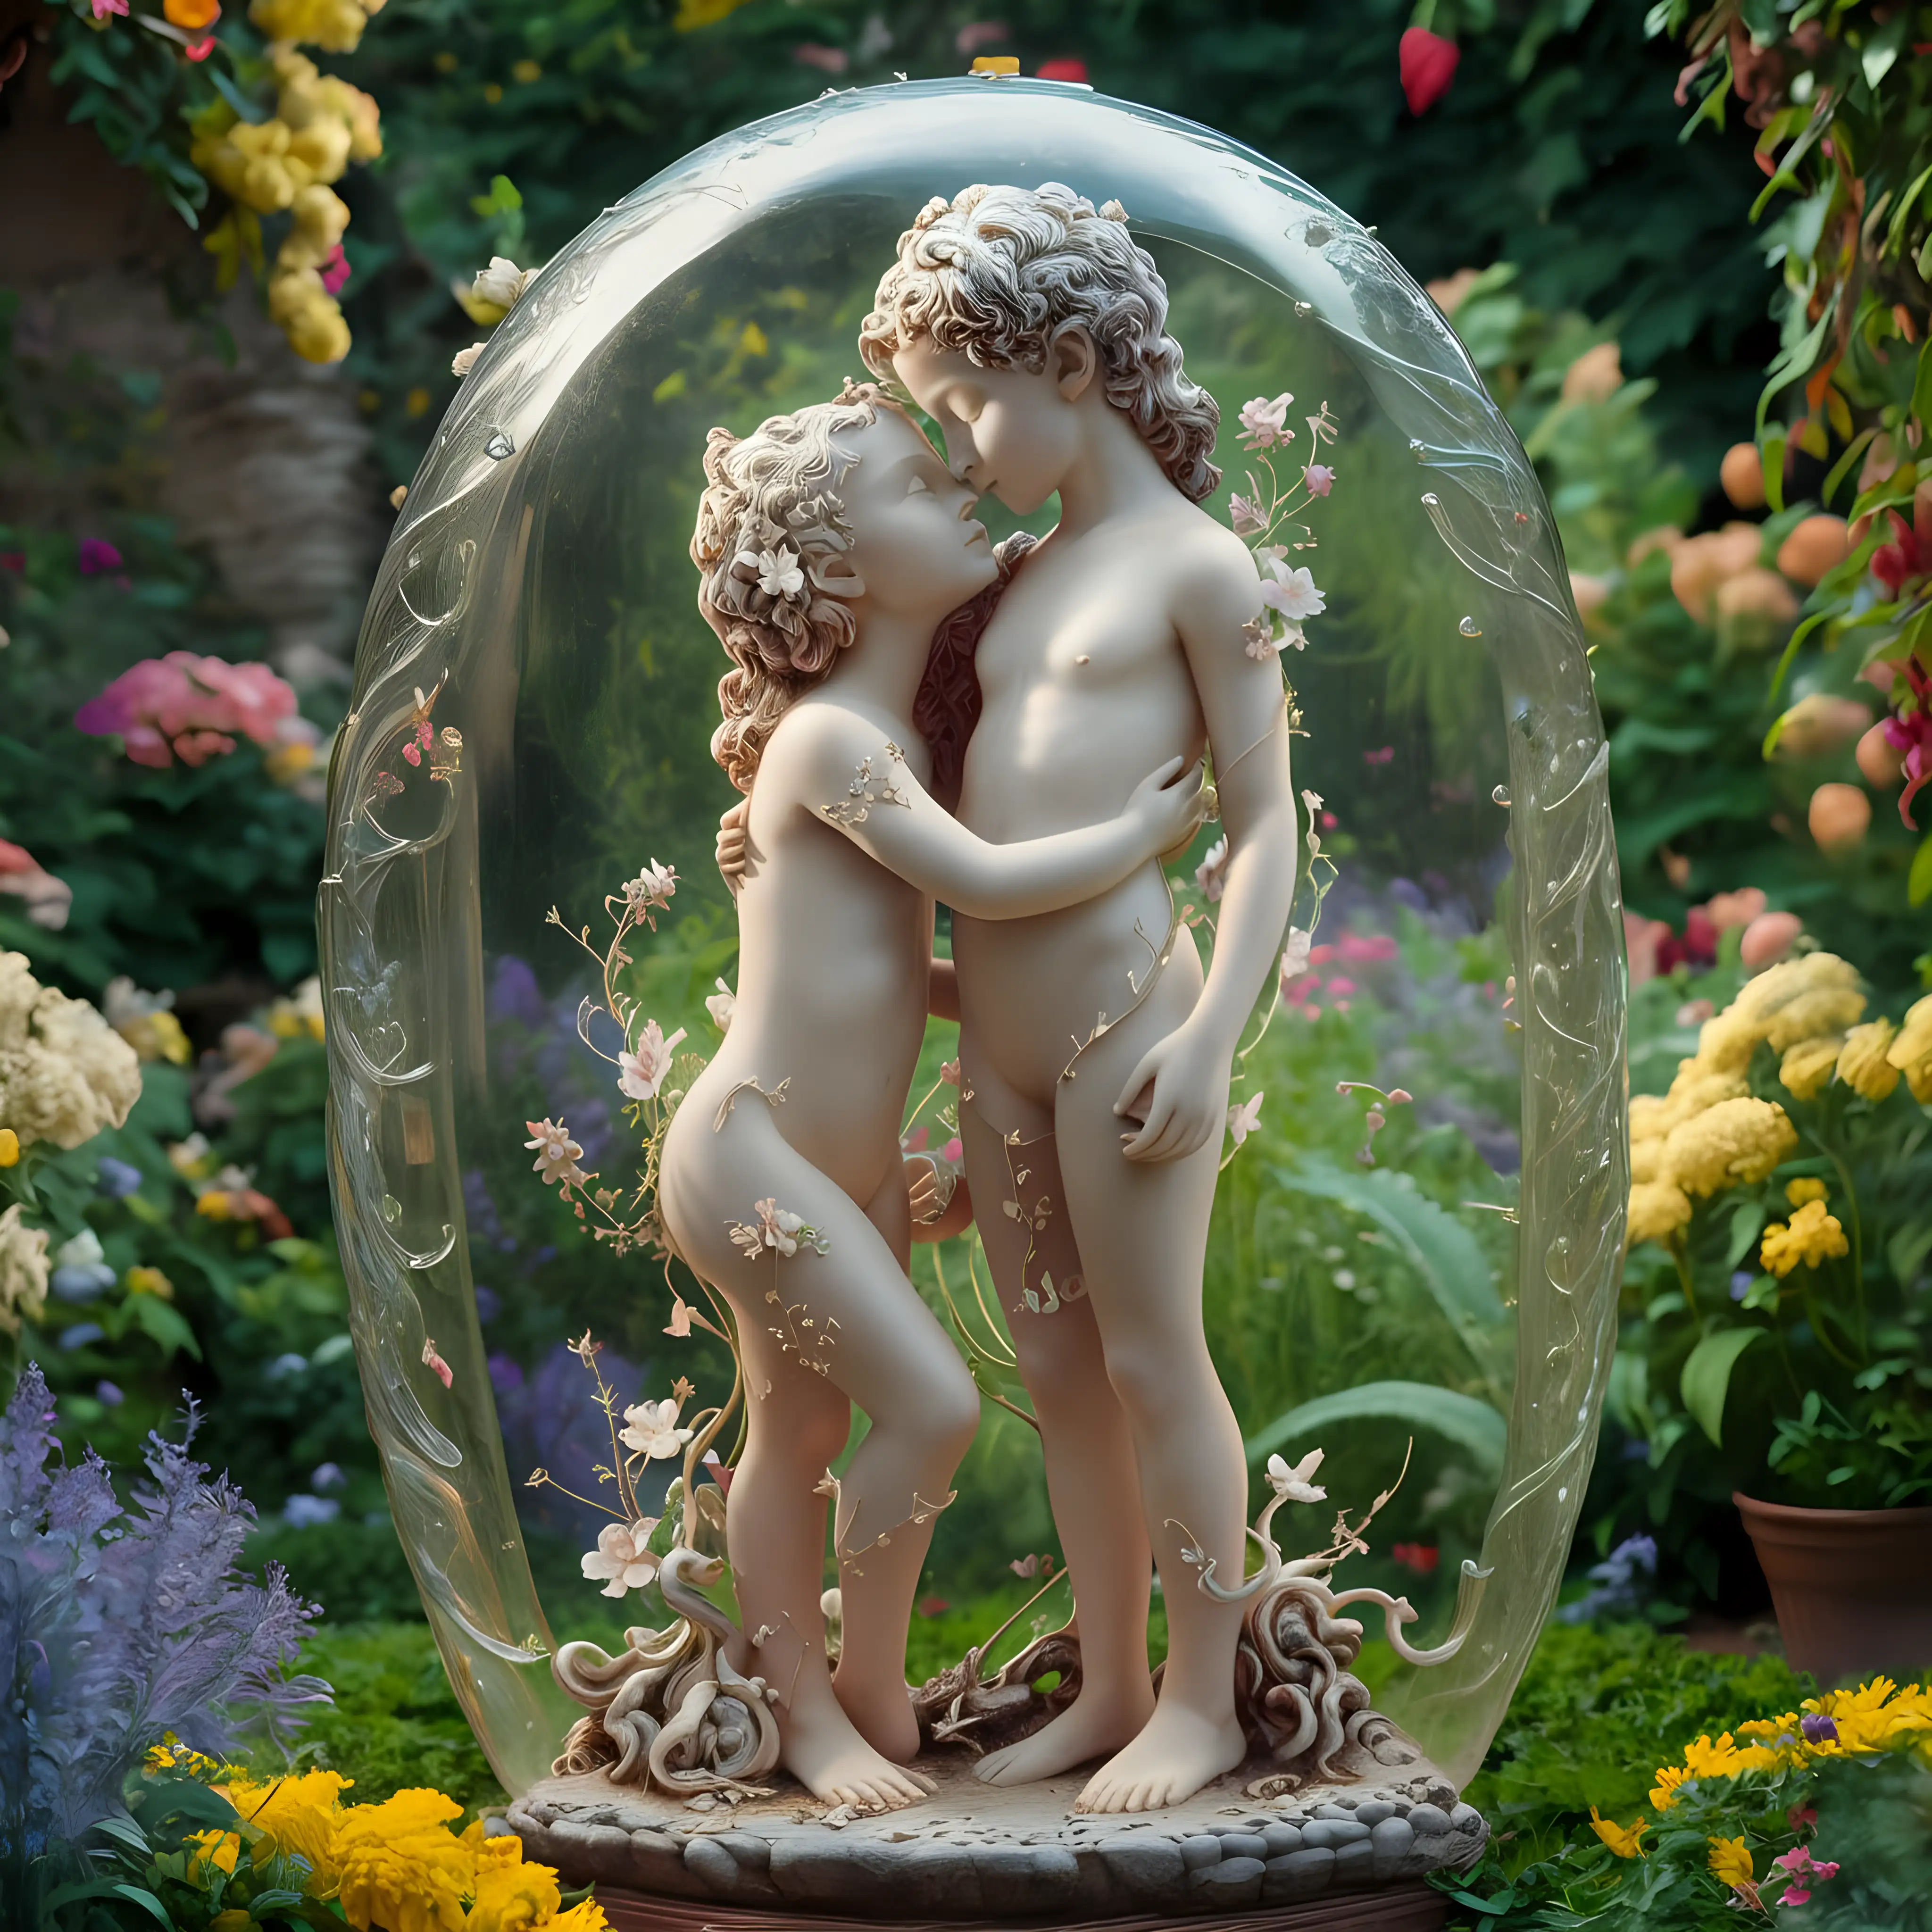 Nude Girl and Boy Statue Amidst Flowering Garden Bliss